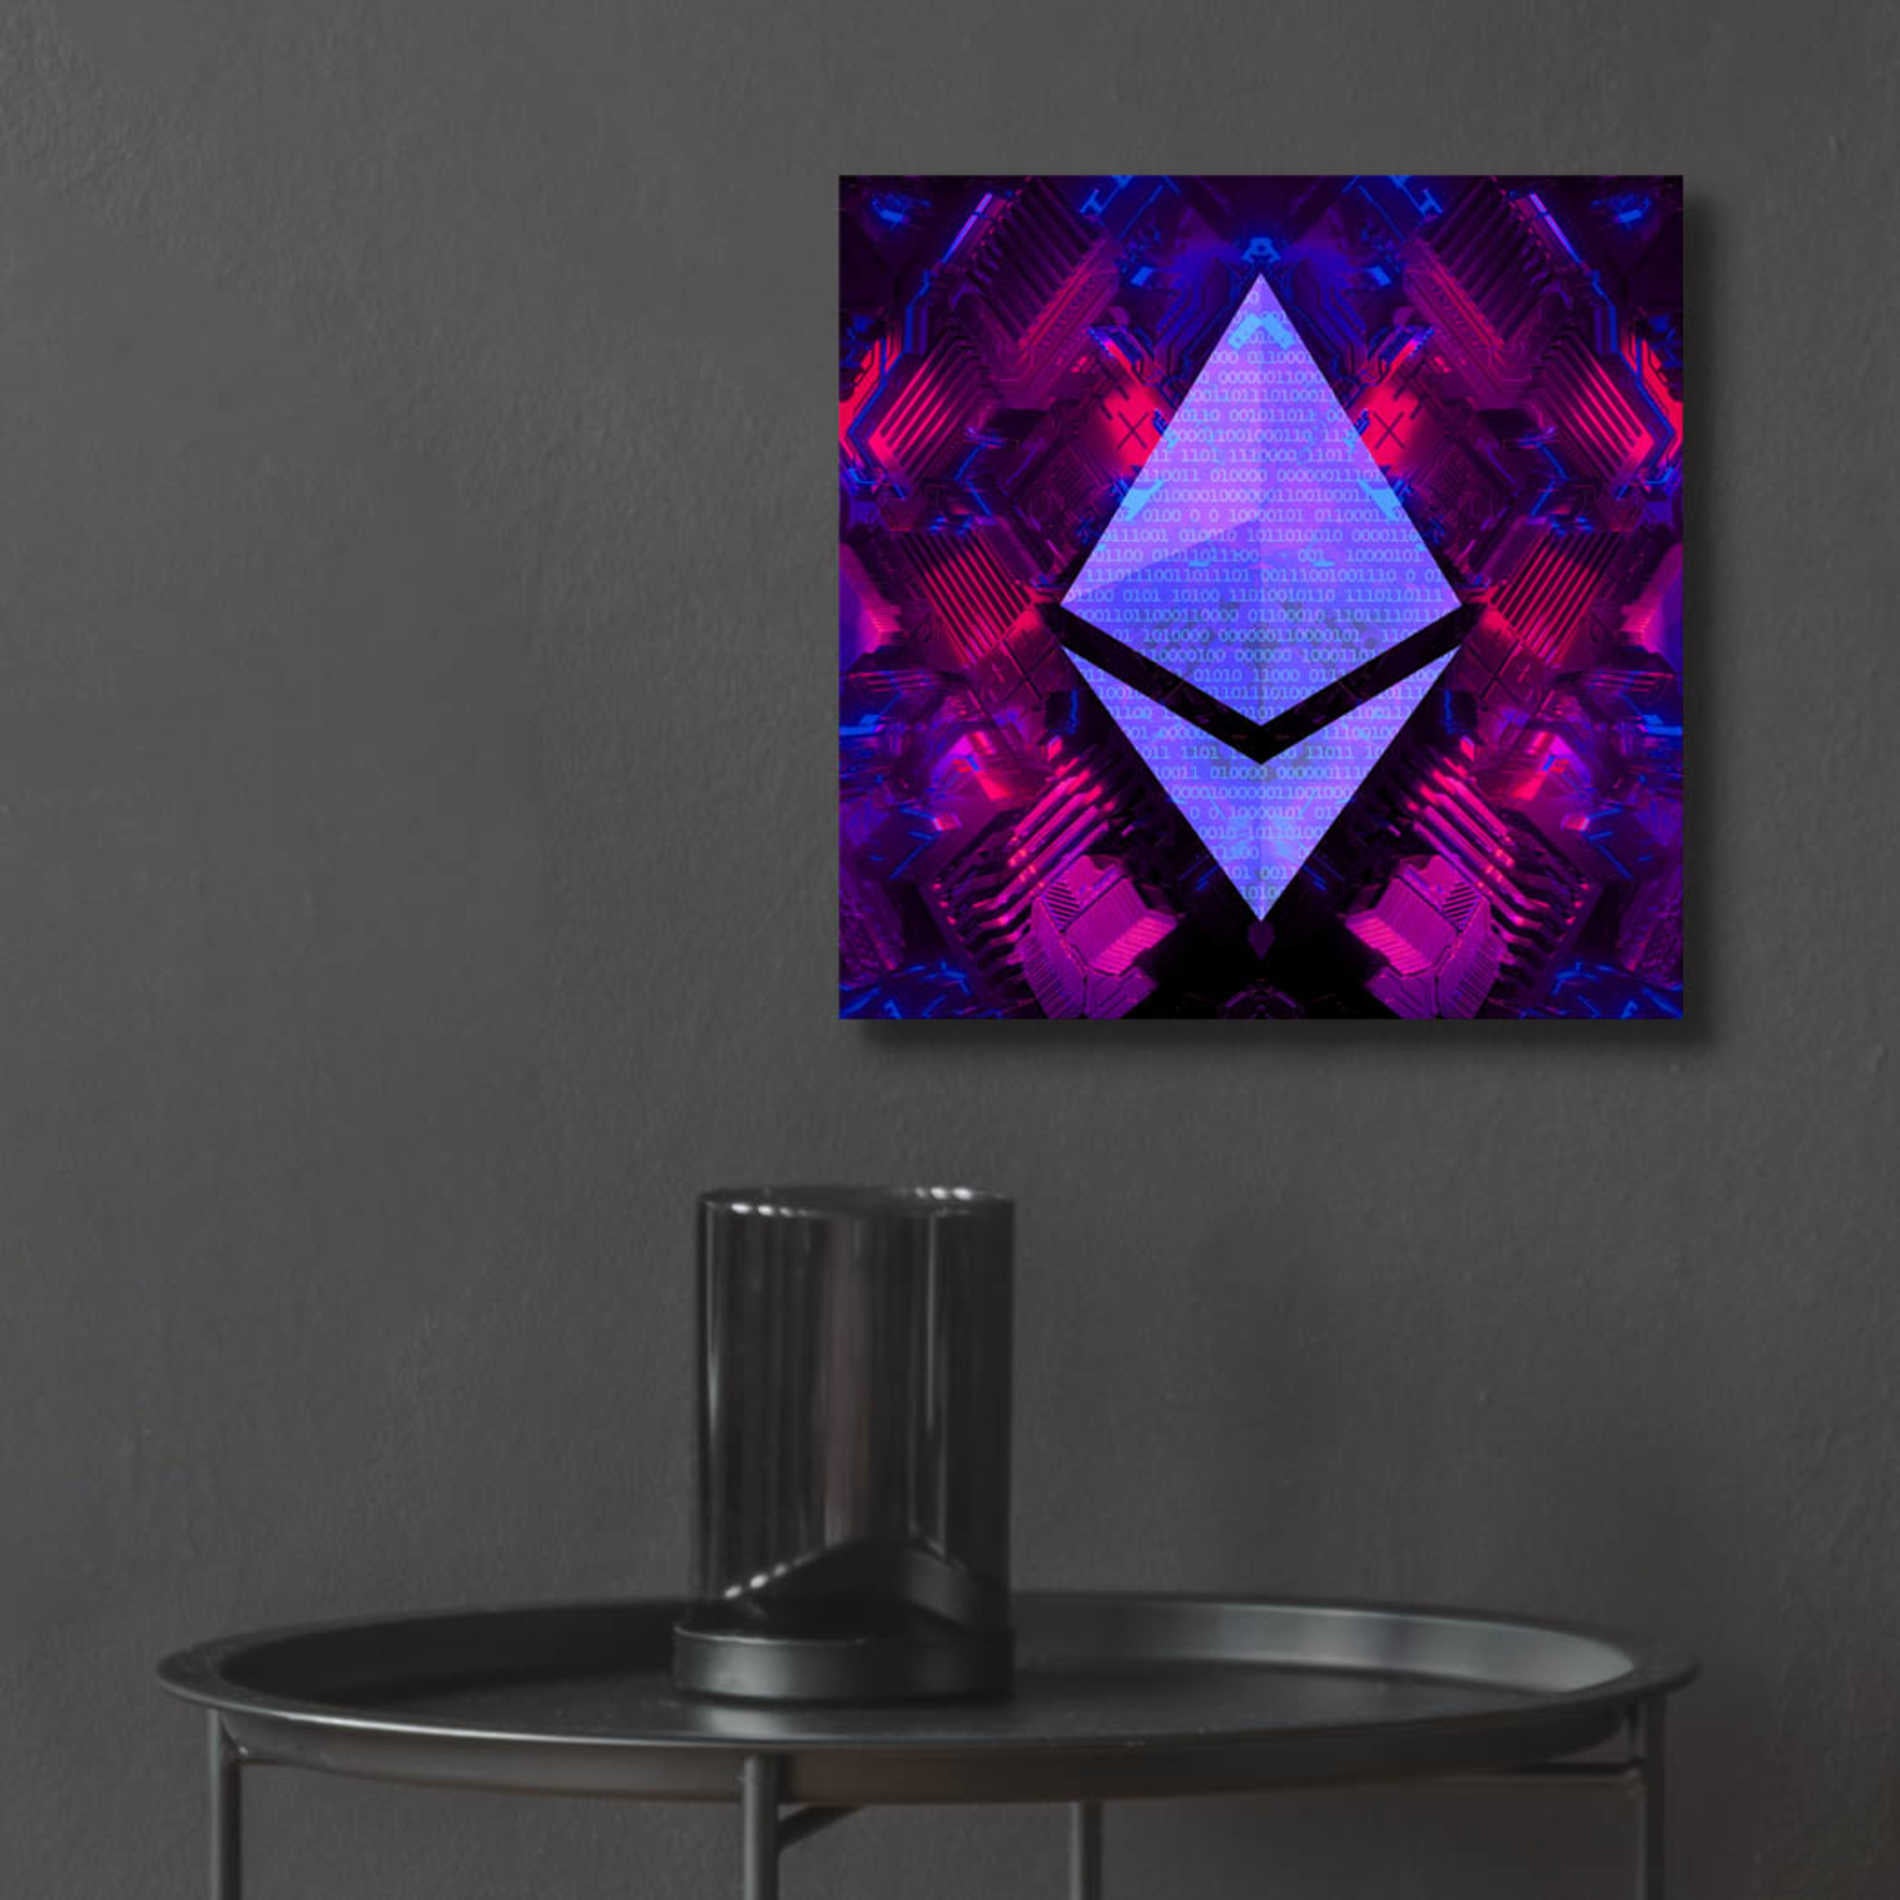 Epic Art 'Ethereum Future' by Cameron Gray Acrylic Glass Wall Art,12x12